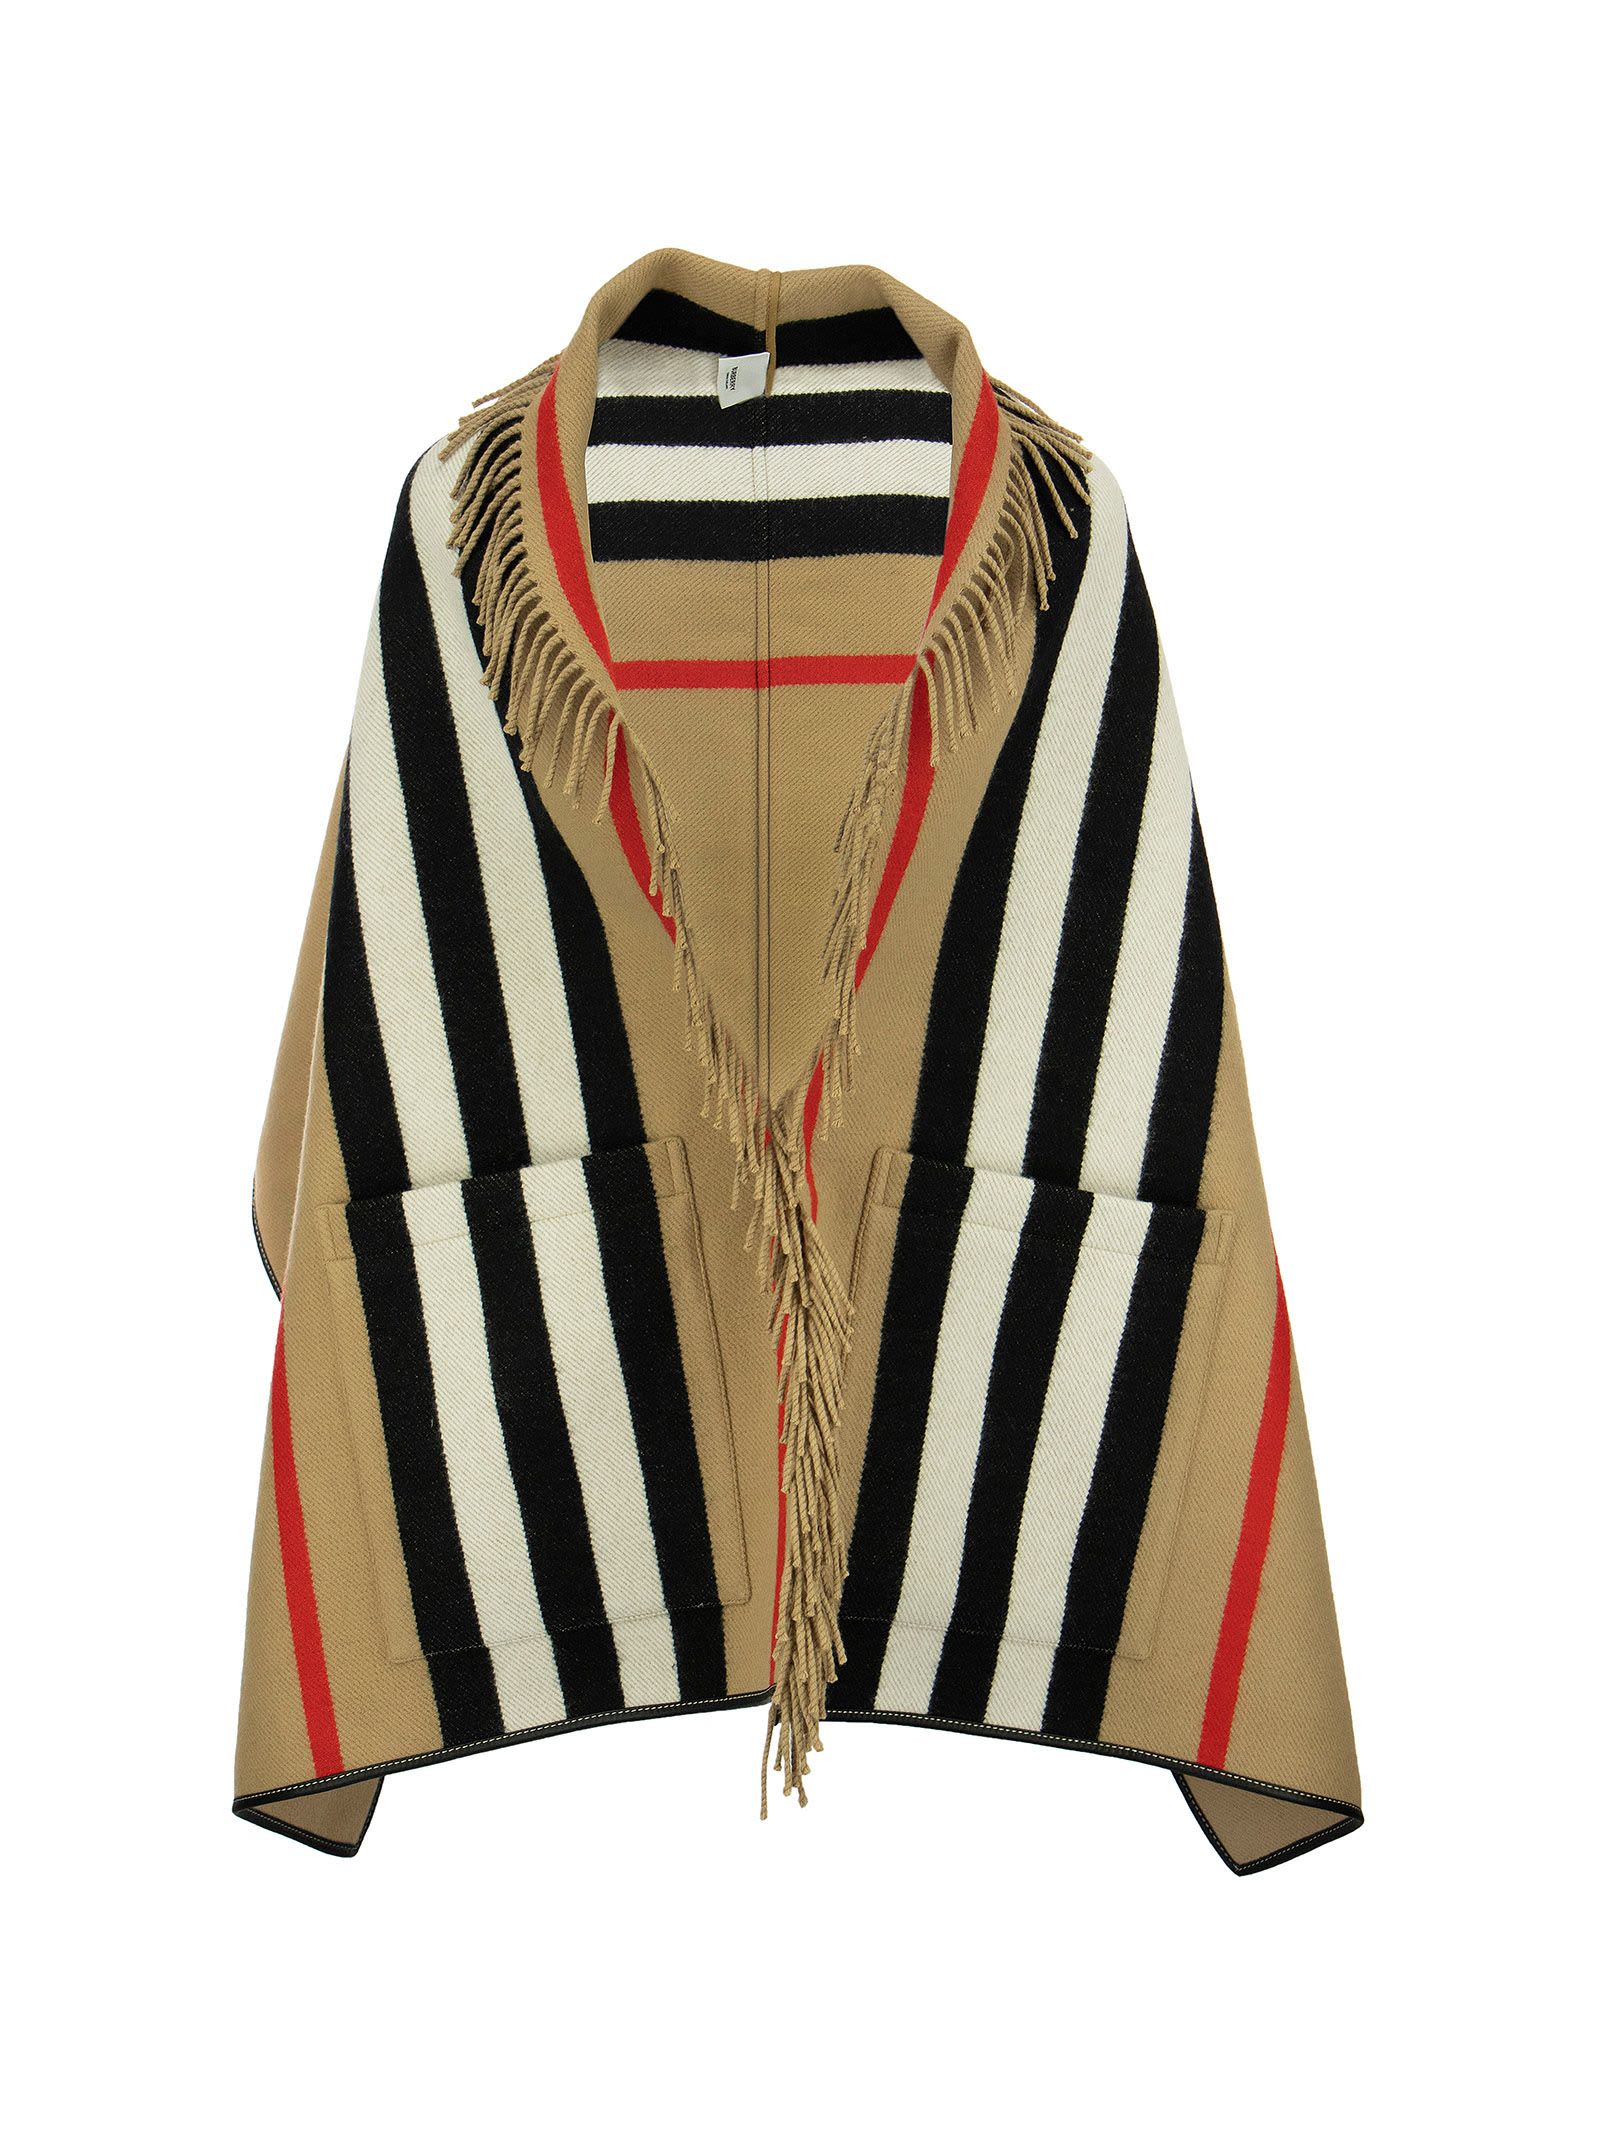 Burberry Wool And Cashmere Jacquard Cape With Iconic Striped Pattern